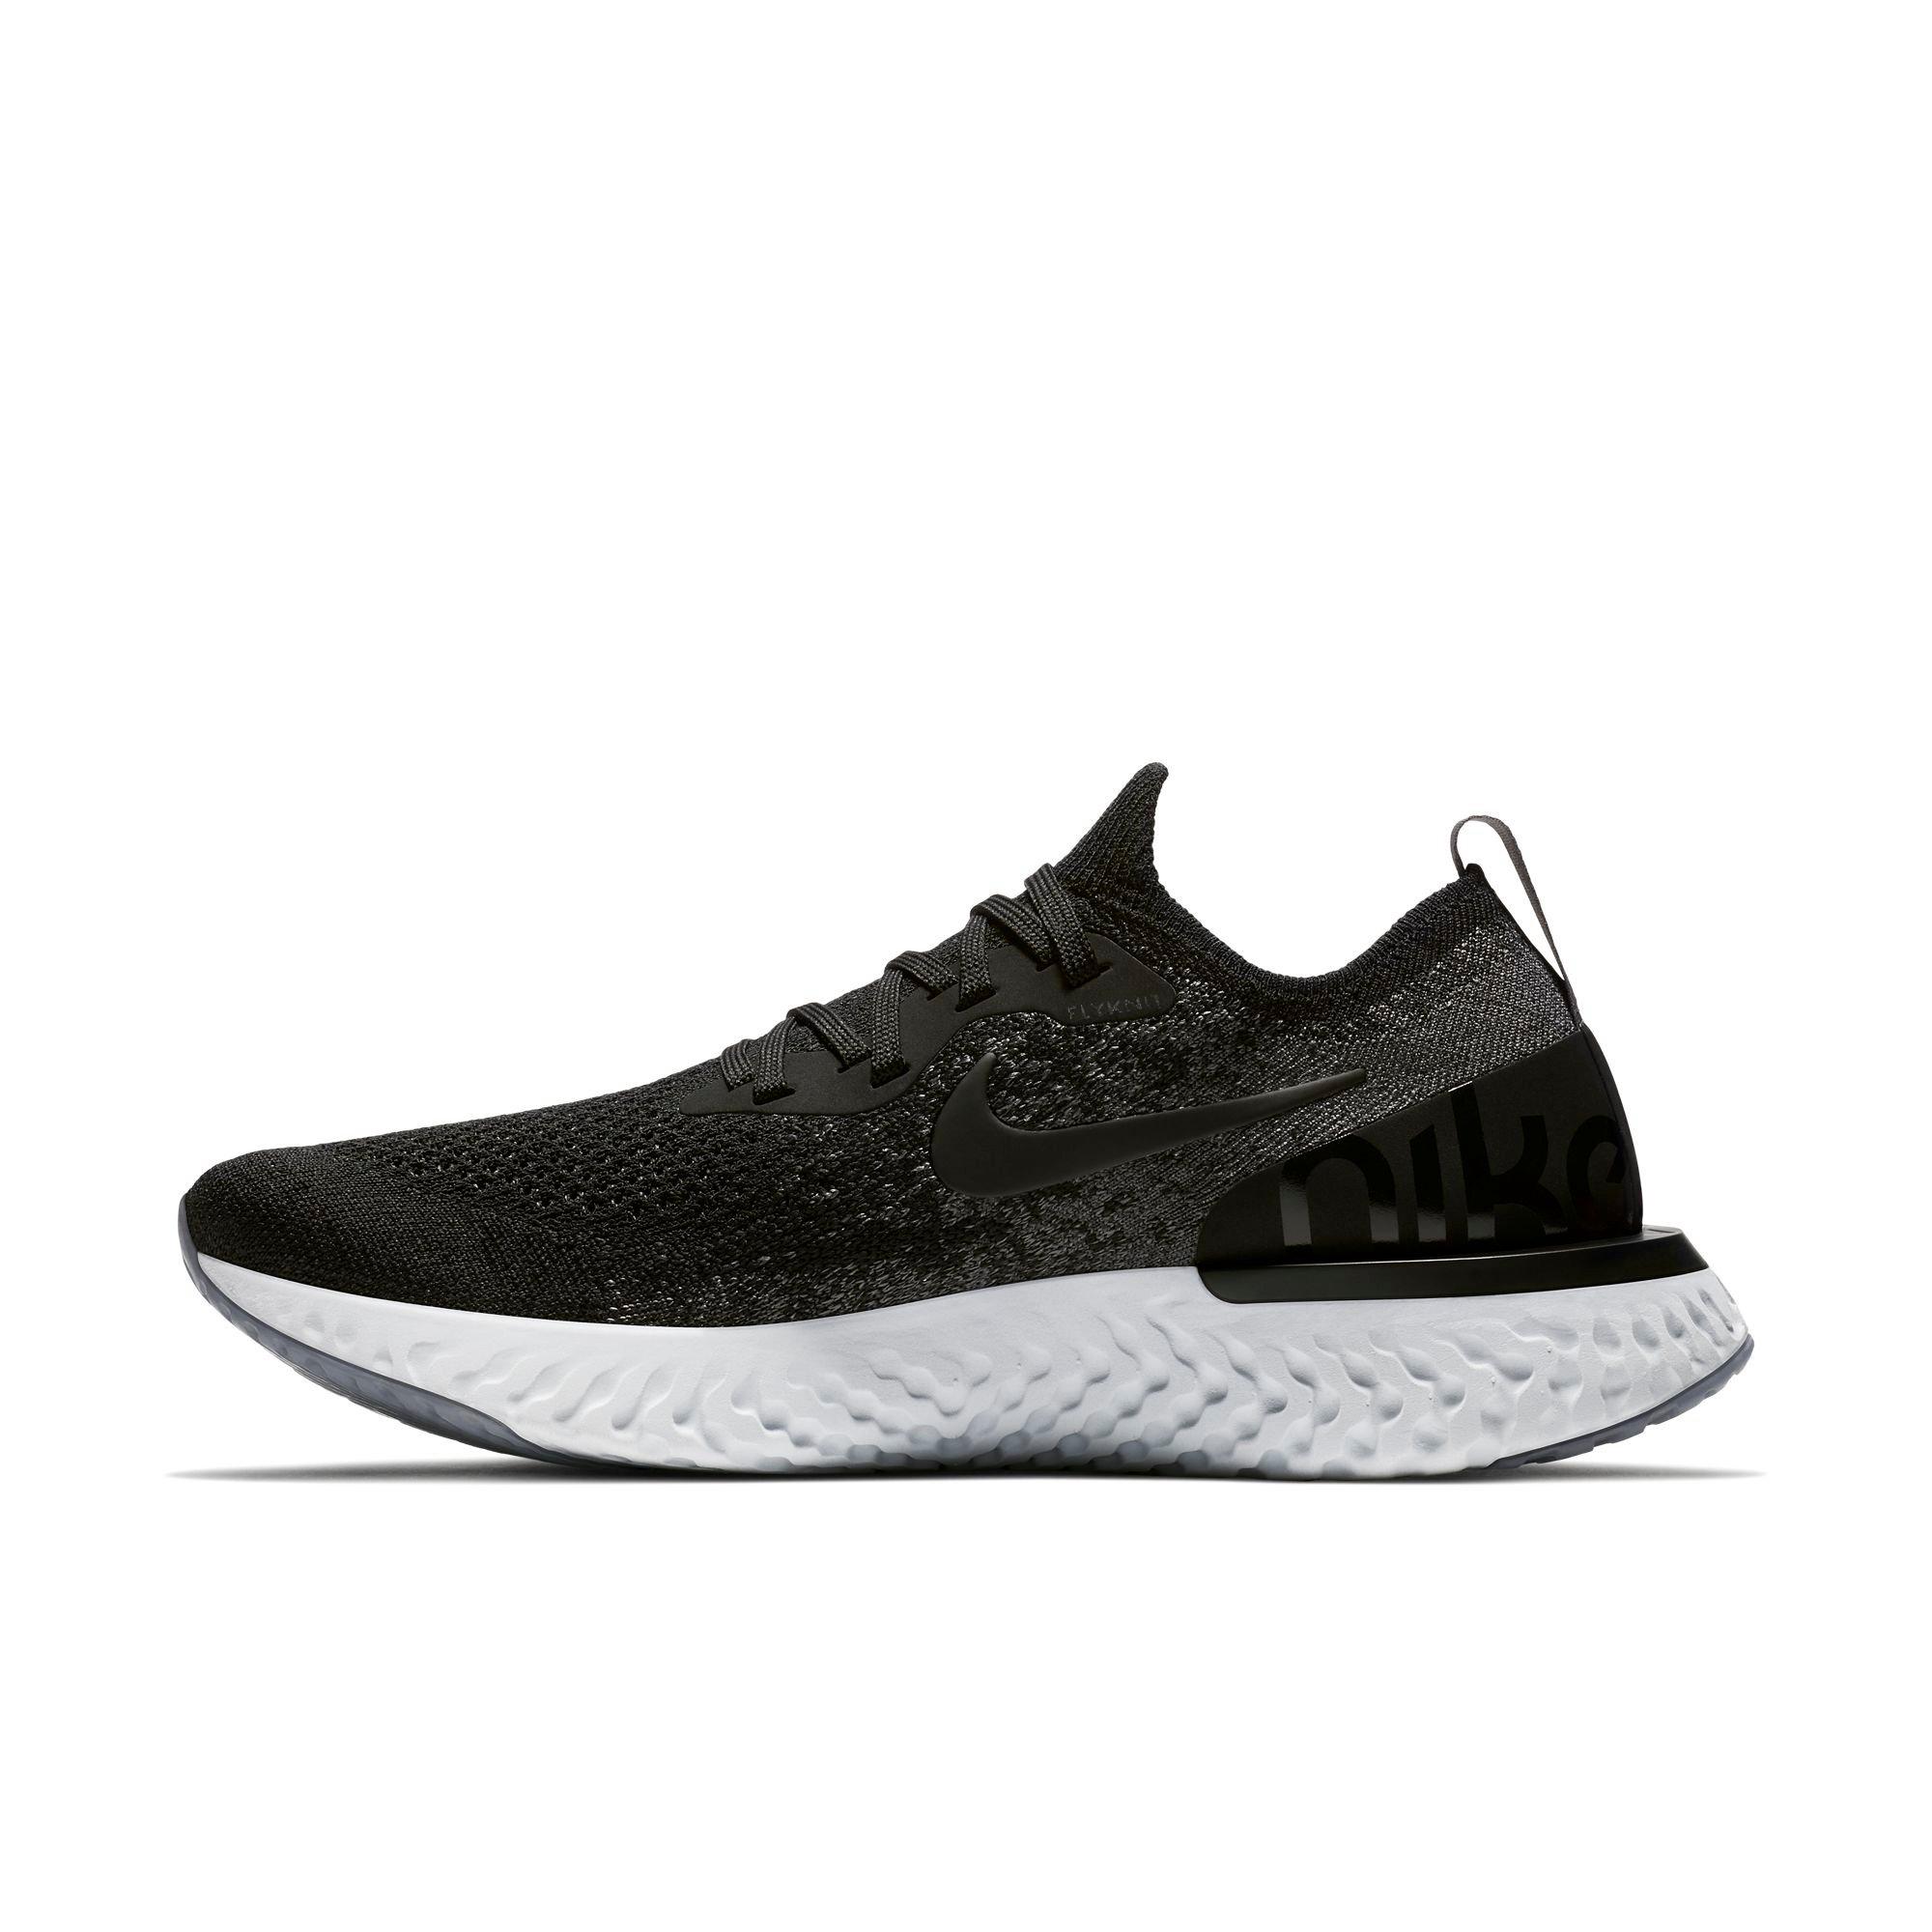 nike epic react flyknit black and white